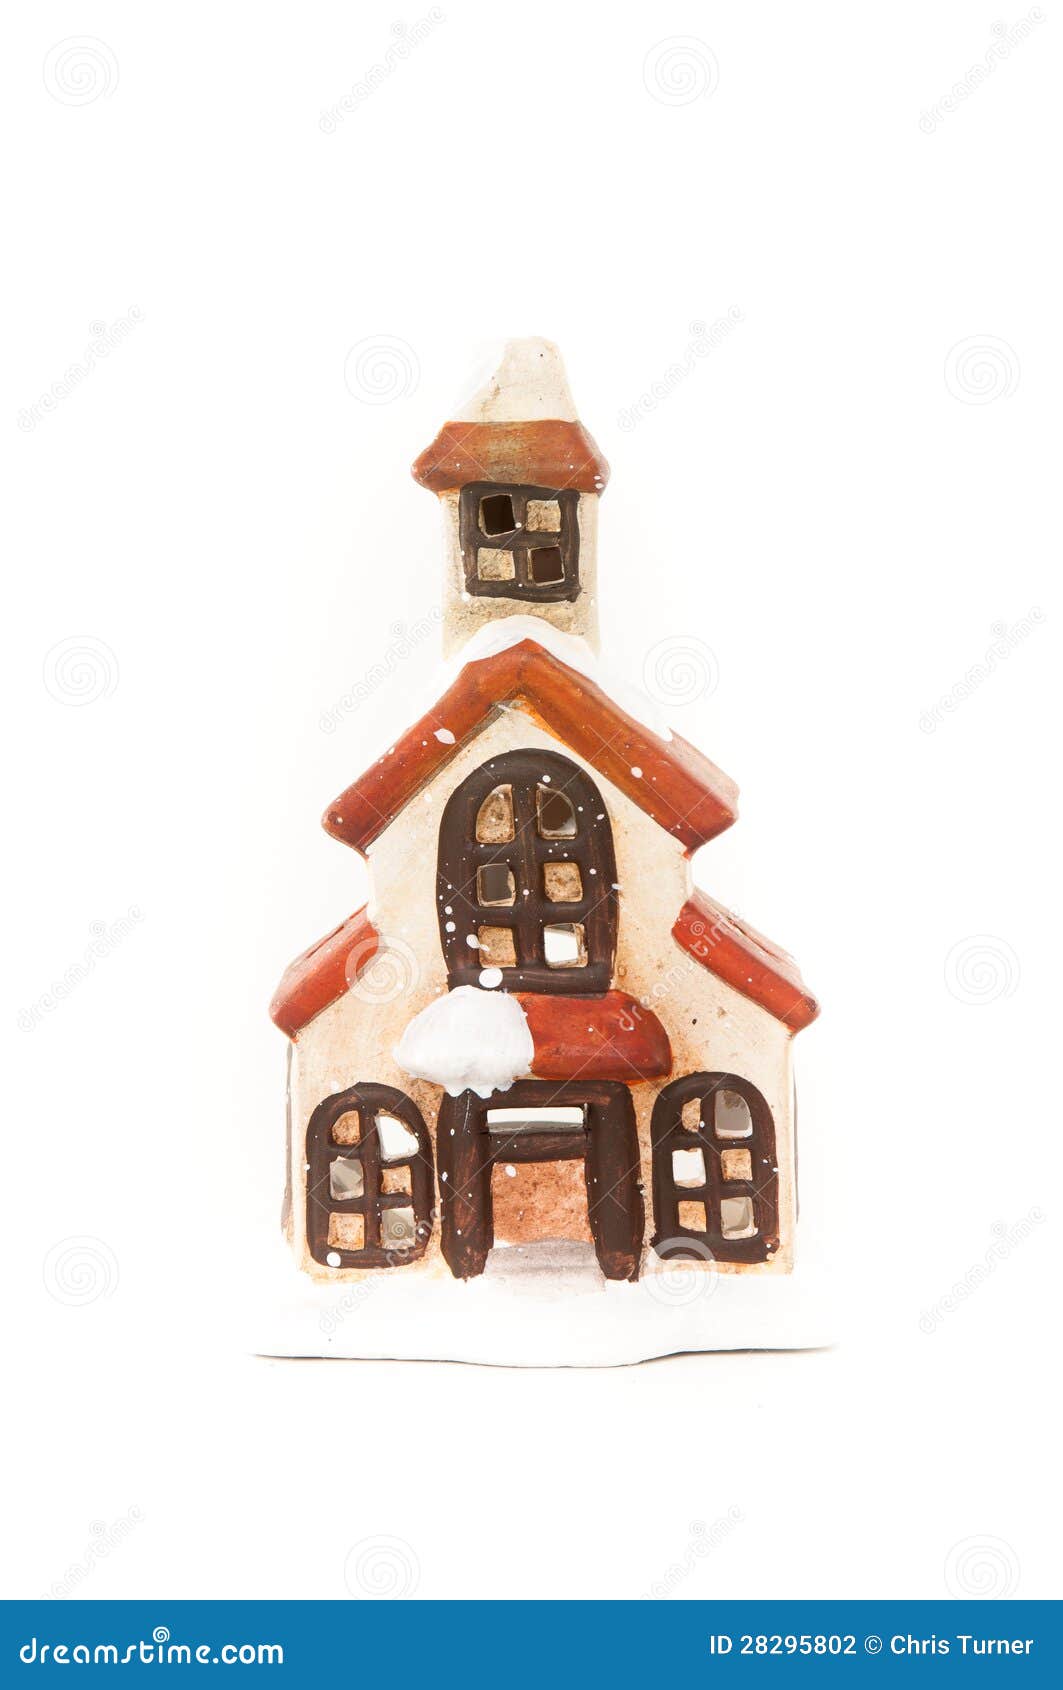 Christmas House Ornament stock photo. Image of ornament - 28295802